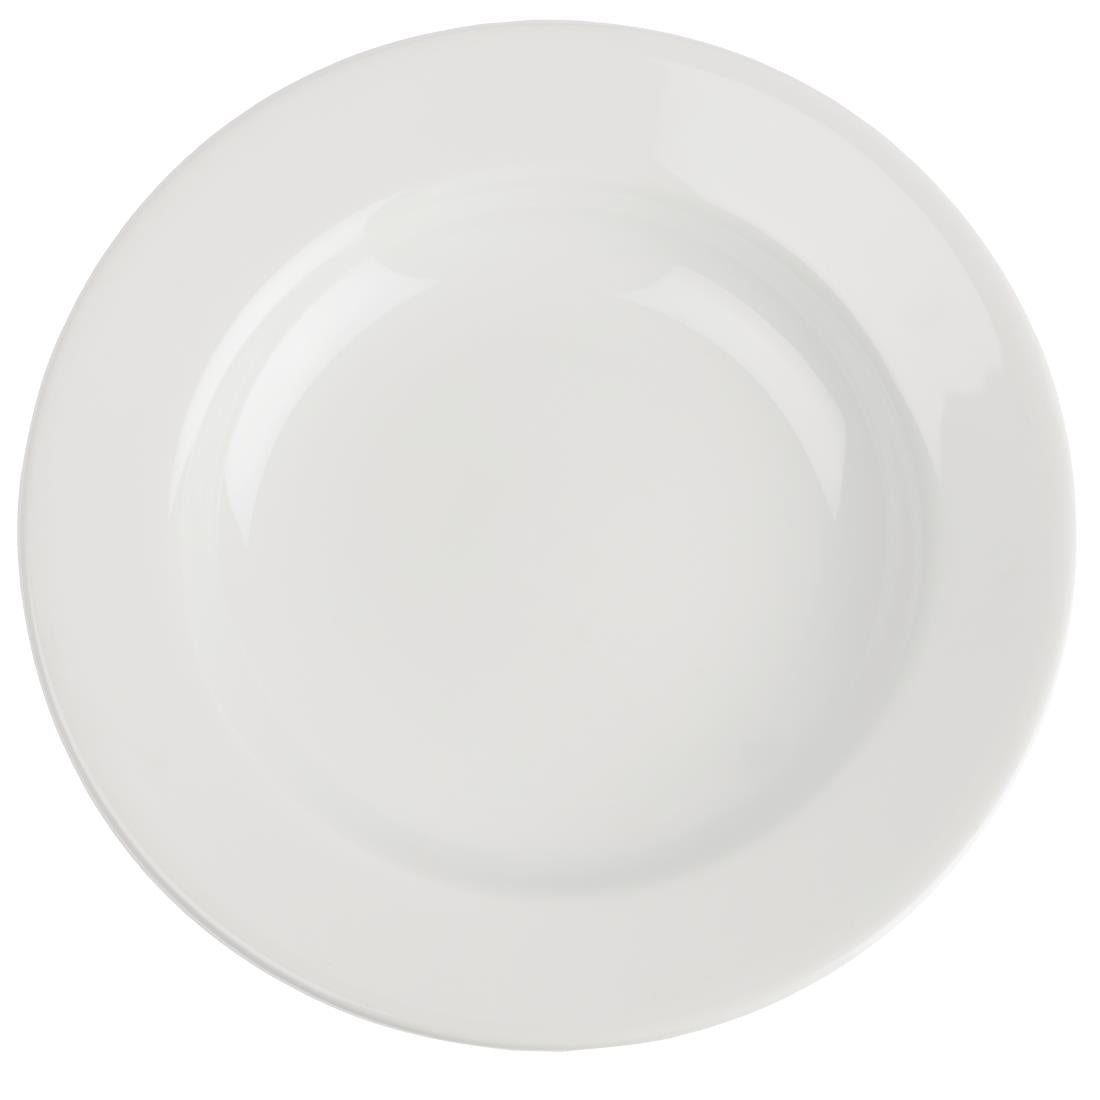 CG058 Royal Porcelain Classic White Pasta Plates 300mm (Pack of 12)